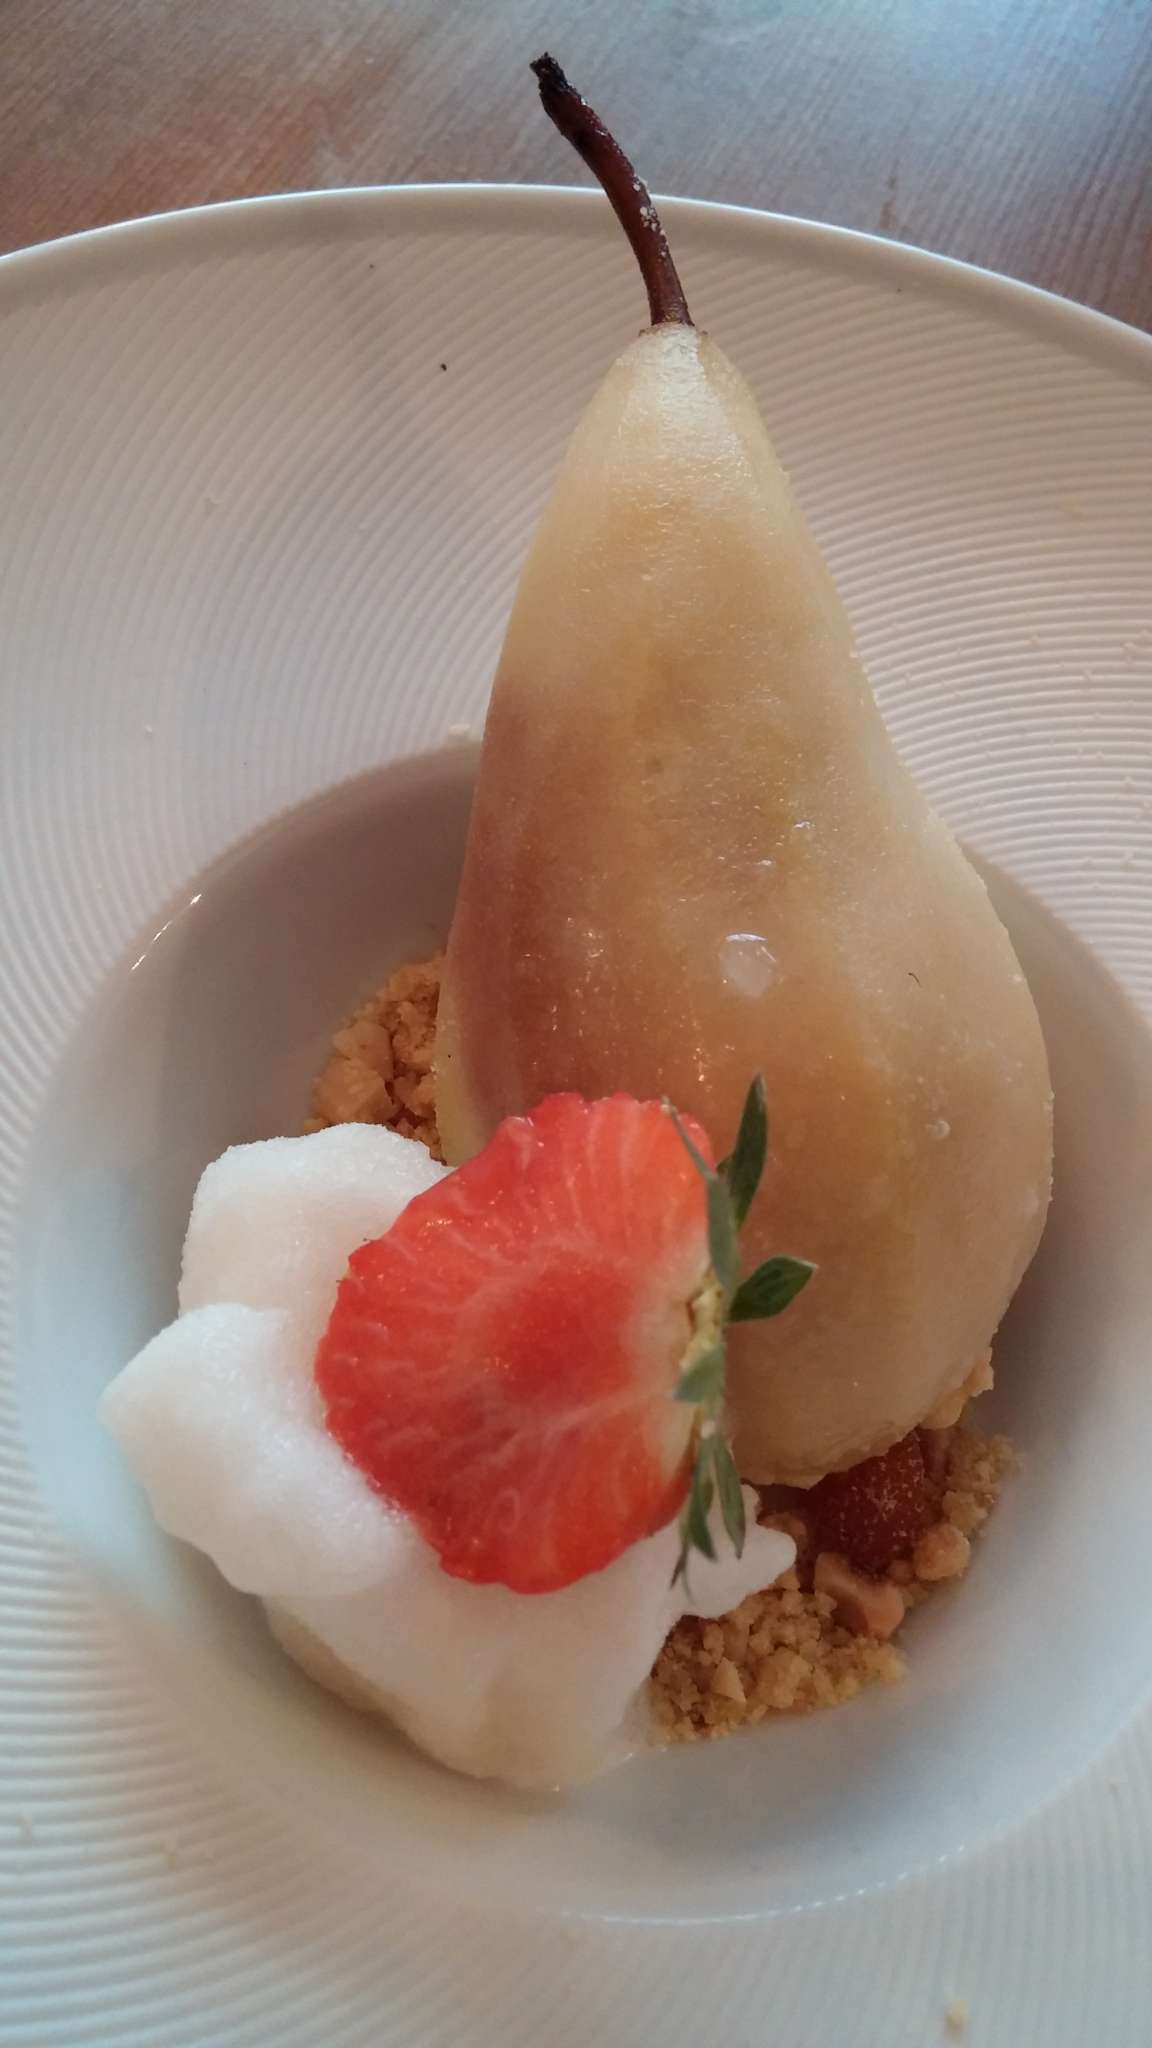 Vanilla poached pear_pear and elderflower sorbet_salted almond and apricot crumb